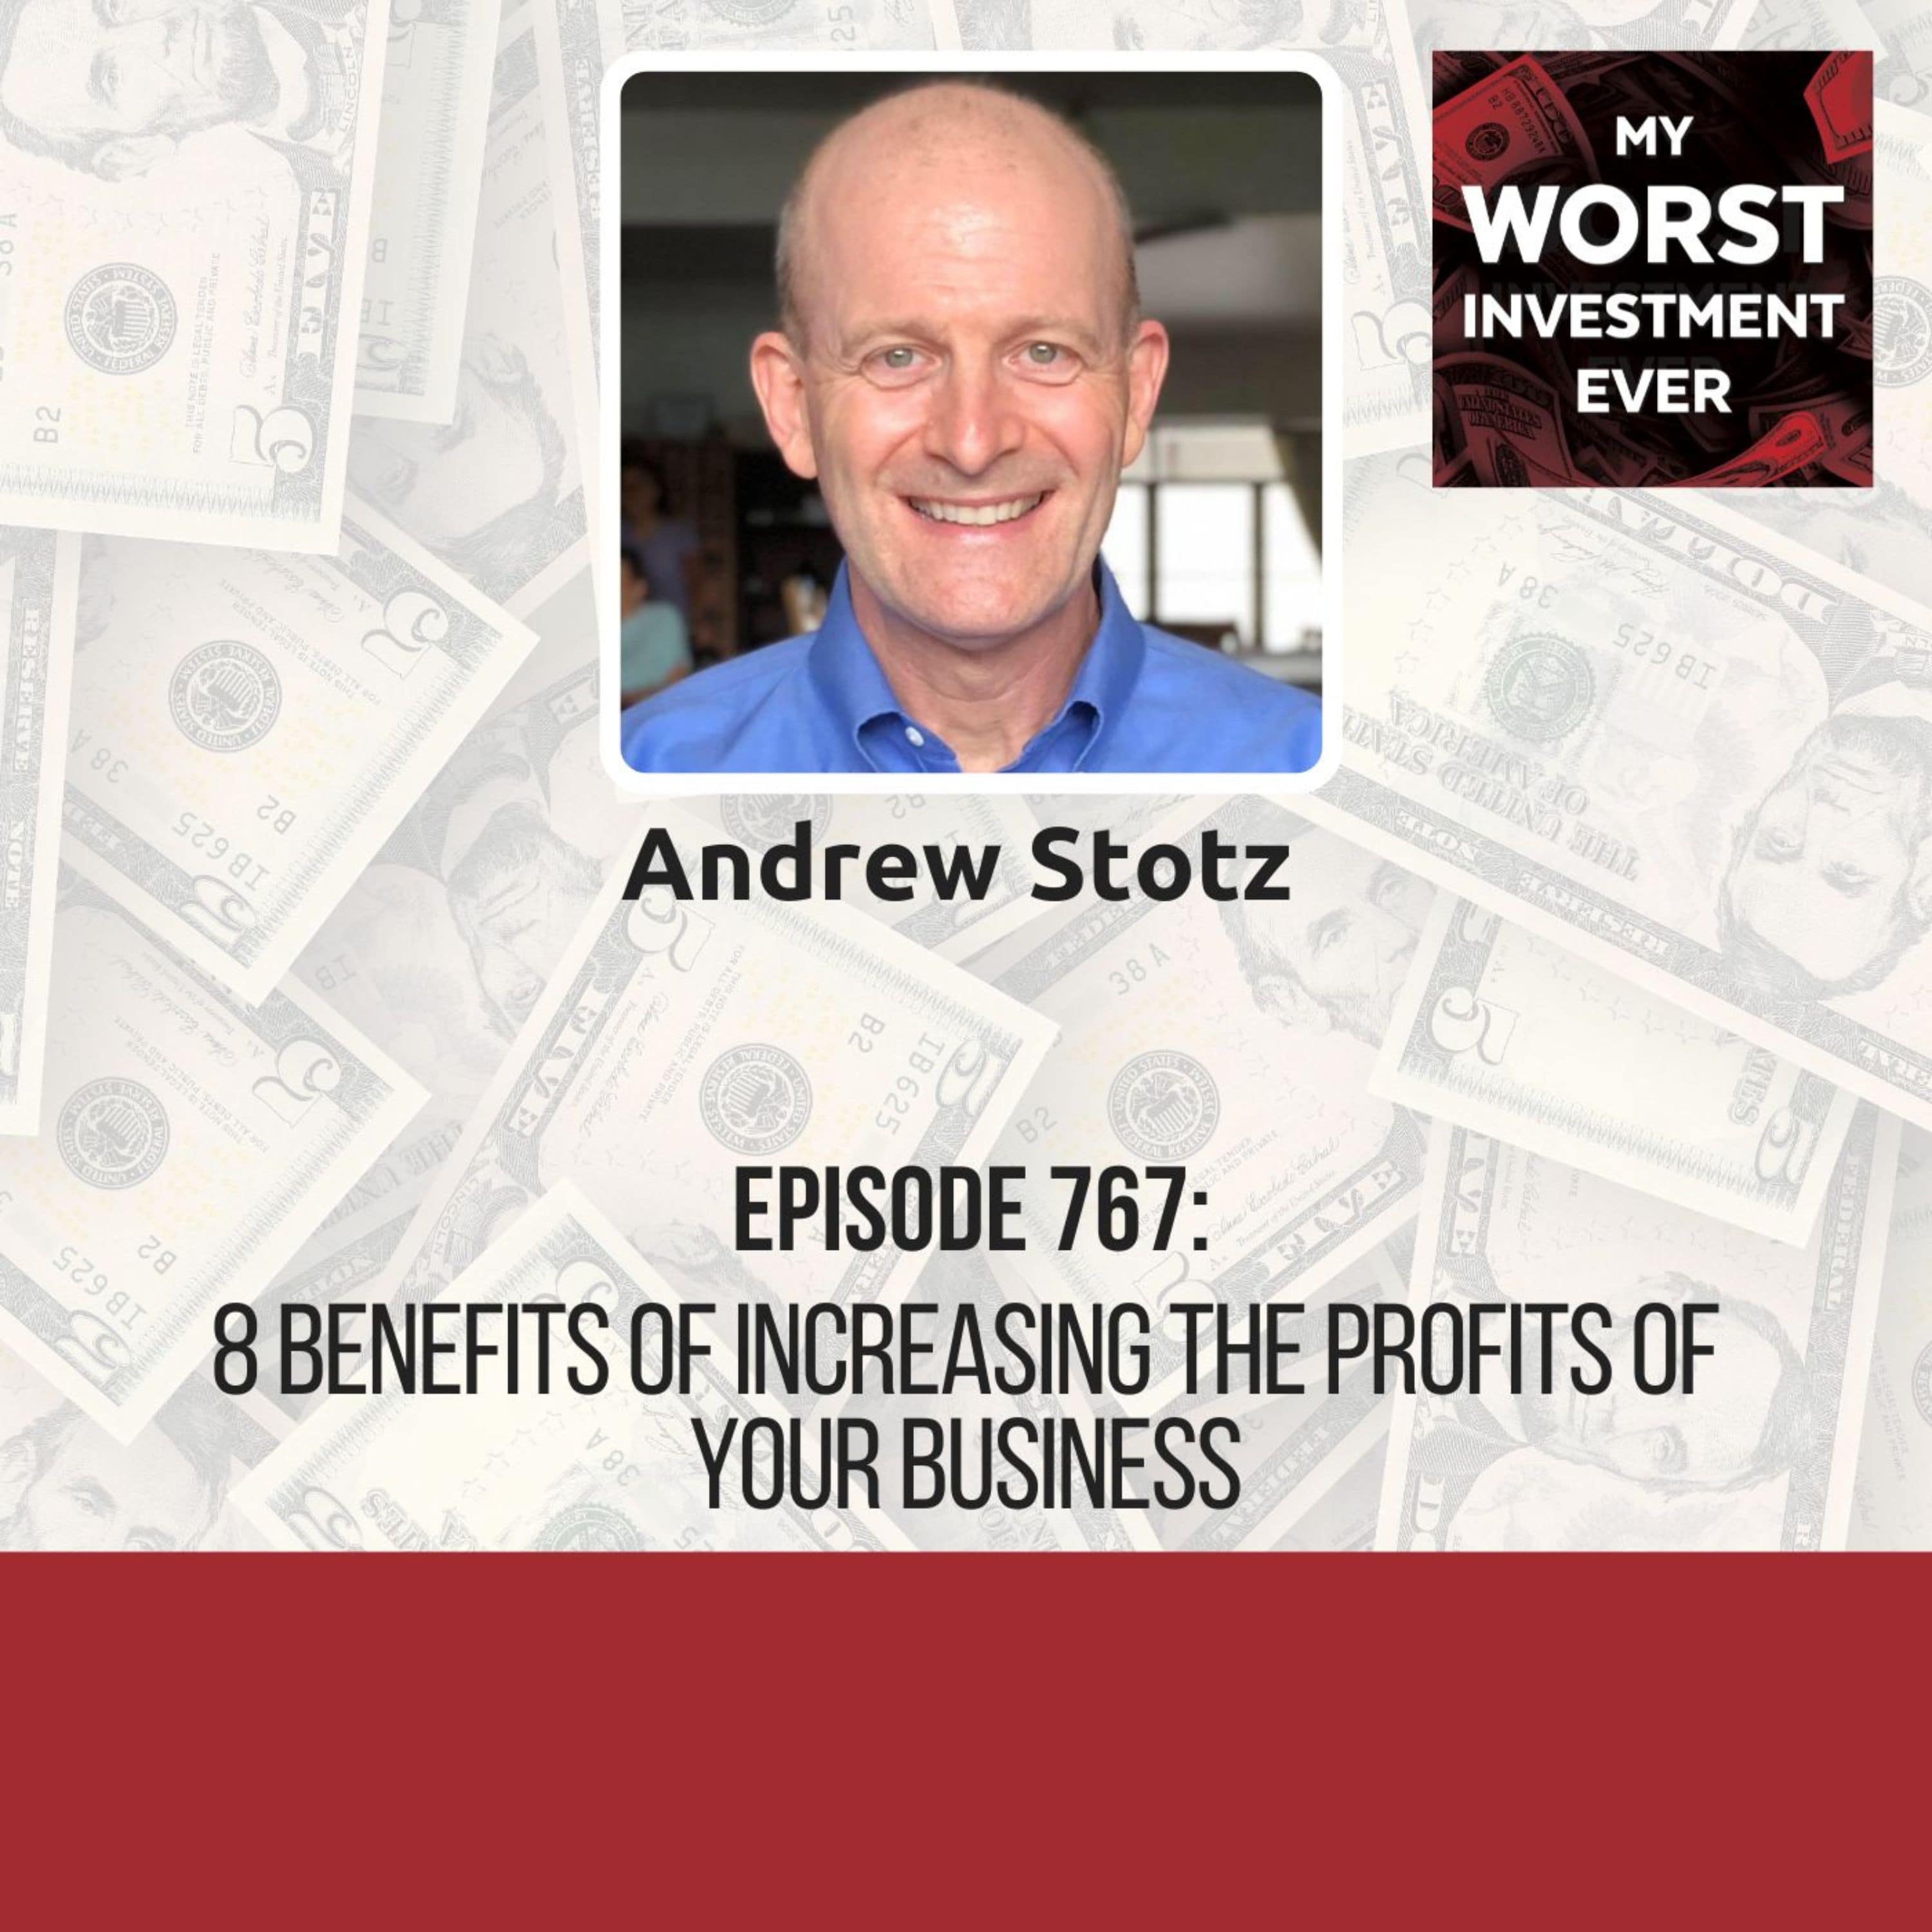 Andrew Stotz - 8 Benefits of Increasing the Profits of Your Business